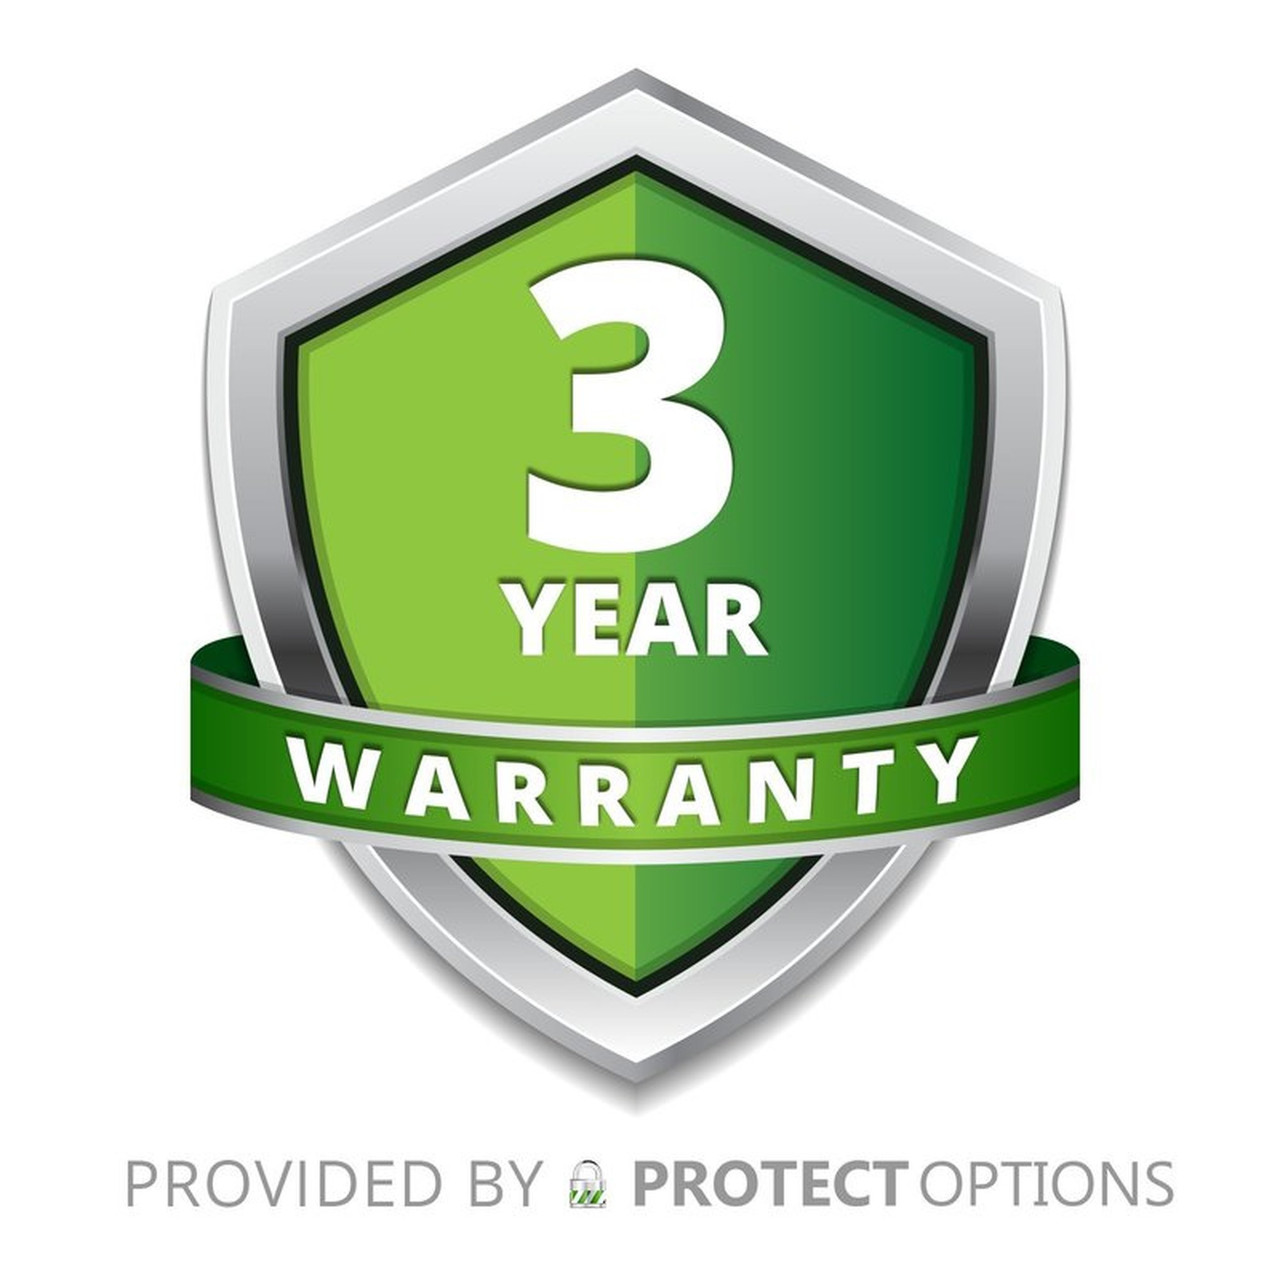 3 Year Warranty With Deductible - Laptops sale price of $1500-$1999.99